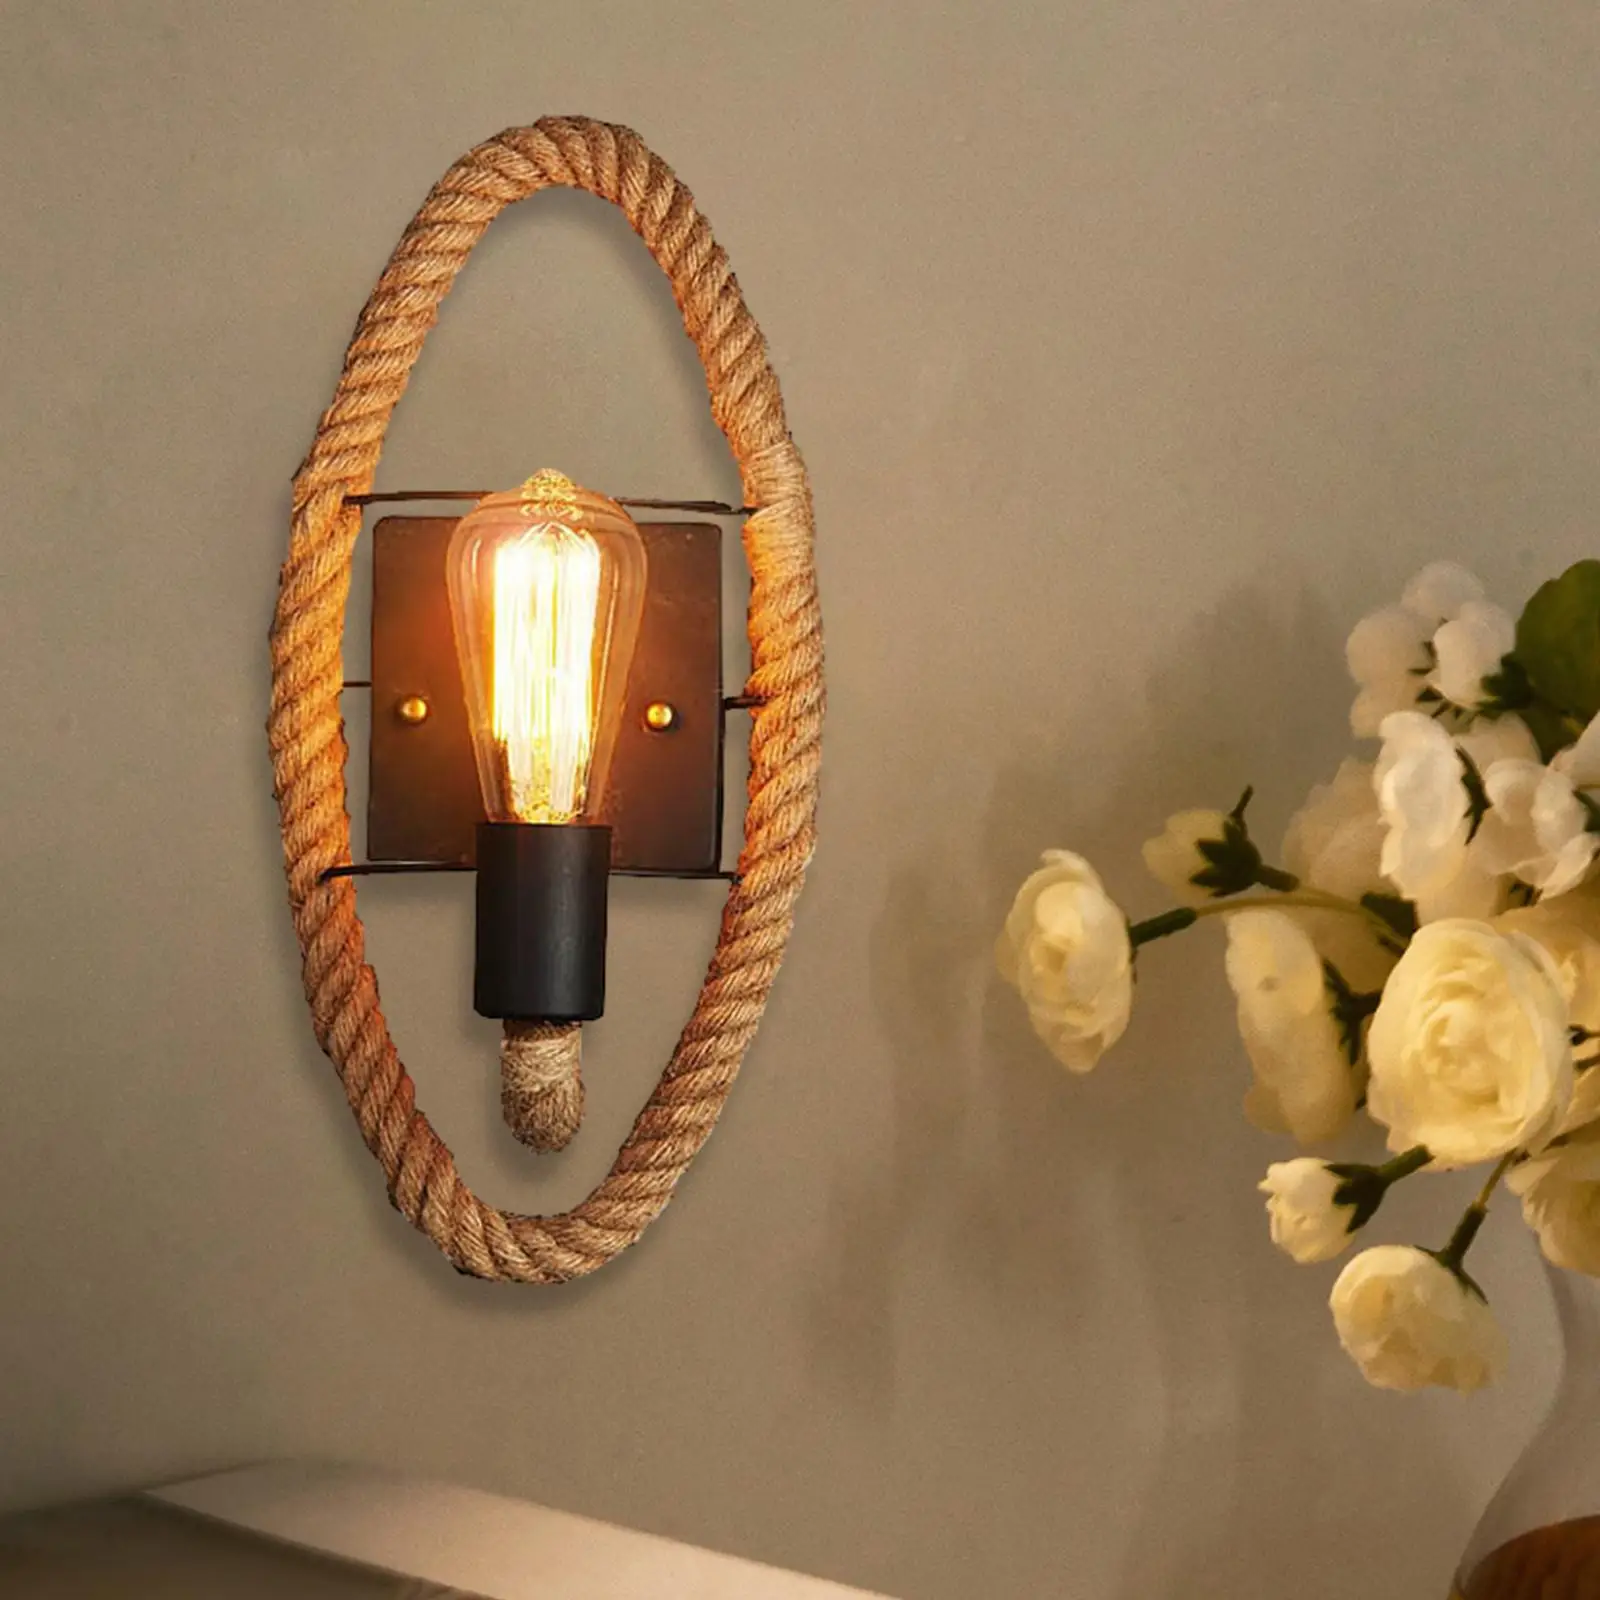 Retro Industrial Wall Sconce Creative Unique Wall Lights Fixture Retro Wall Mount Light for Hallway Balcony Dining Room Indoor